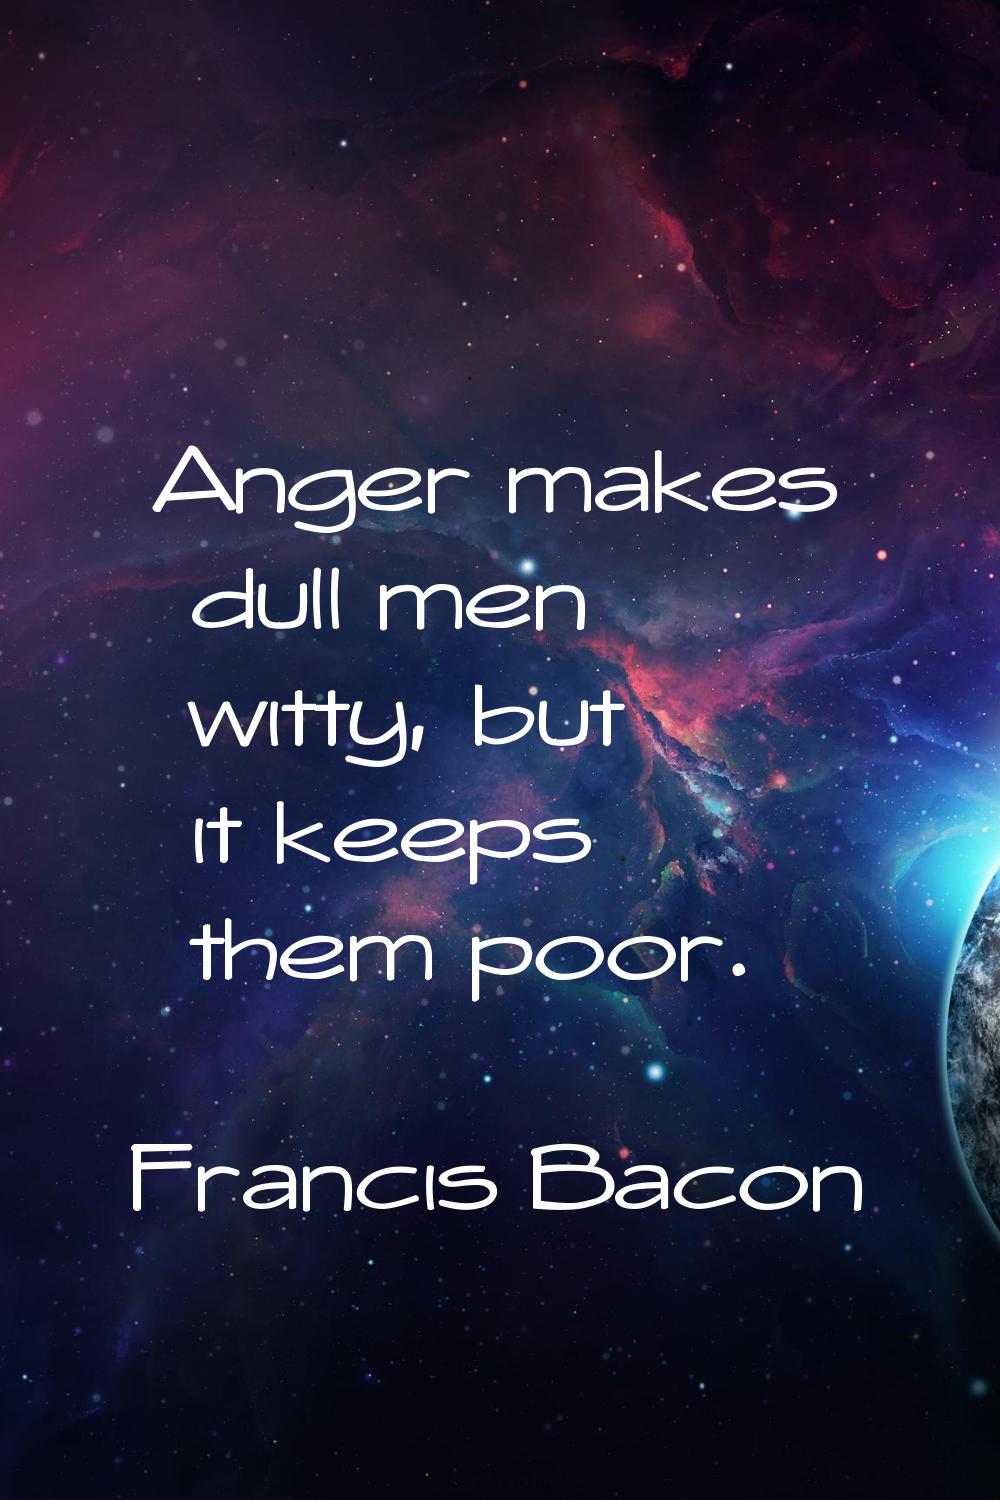 Anger makes dull men witty, but it keeps them poor.